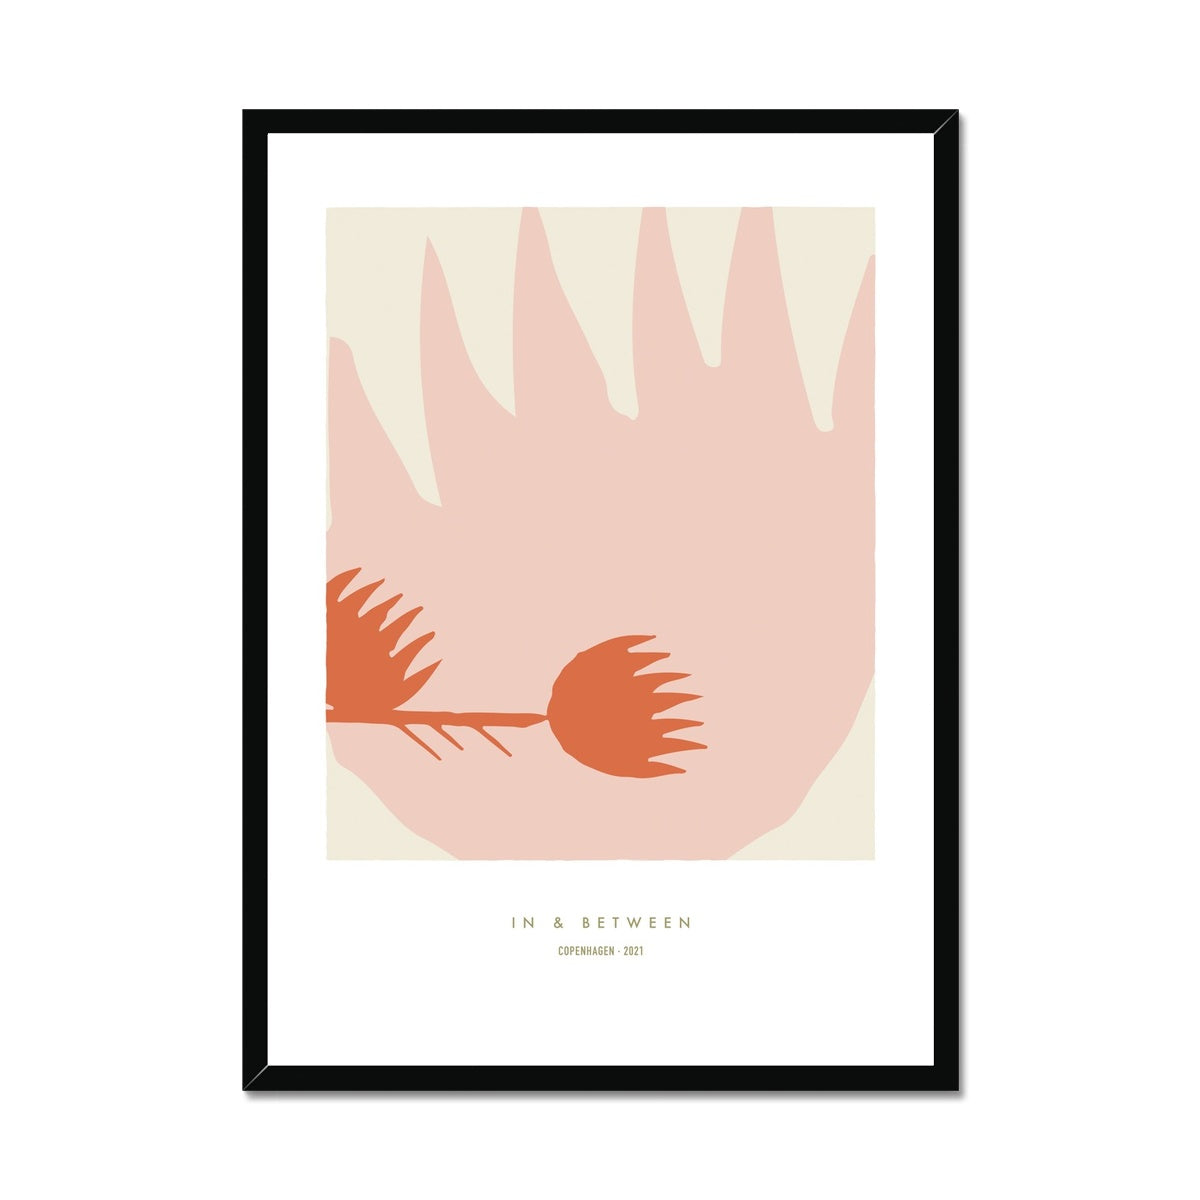 Art print of one large thistle flower light red with a smaller thistle flower in left side on a cream background with white space around and a black wooden frame.